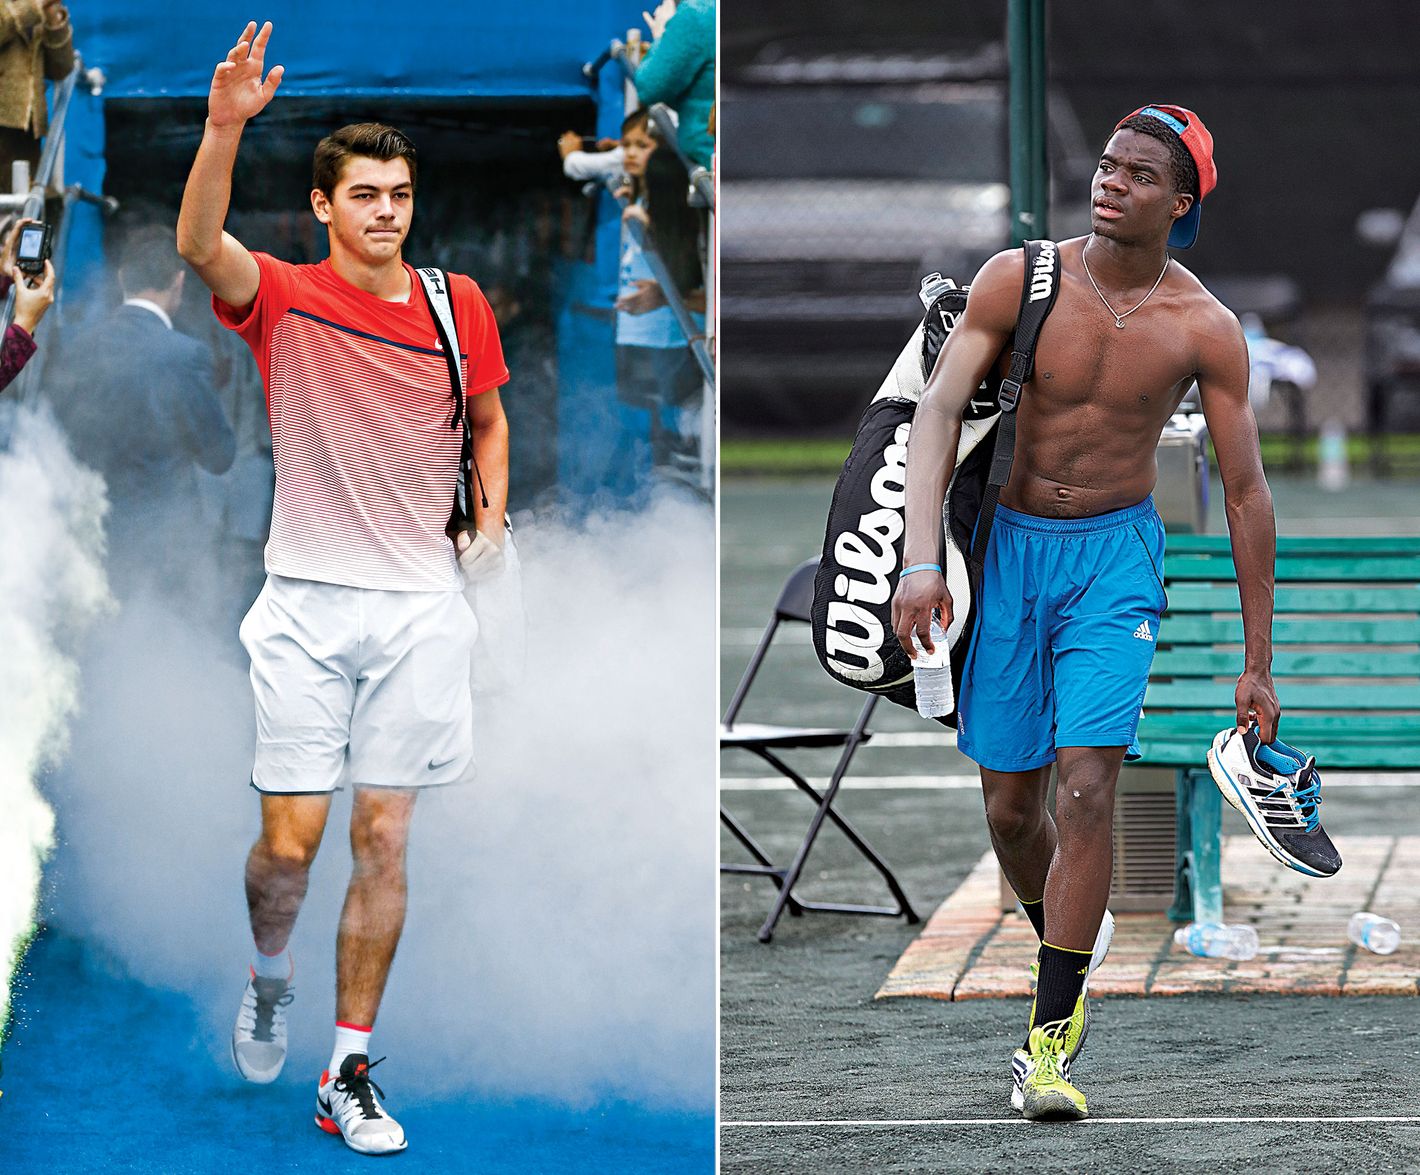 The Making of America’s Next Great Tennis Talent